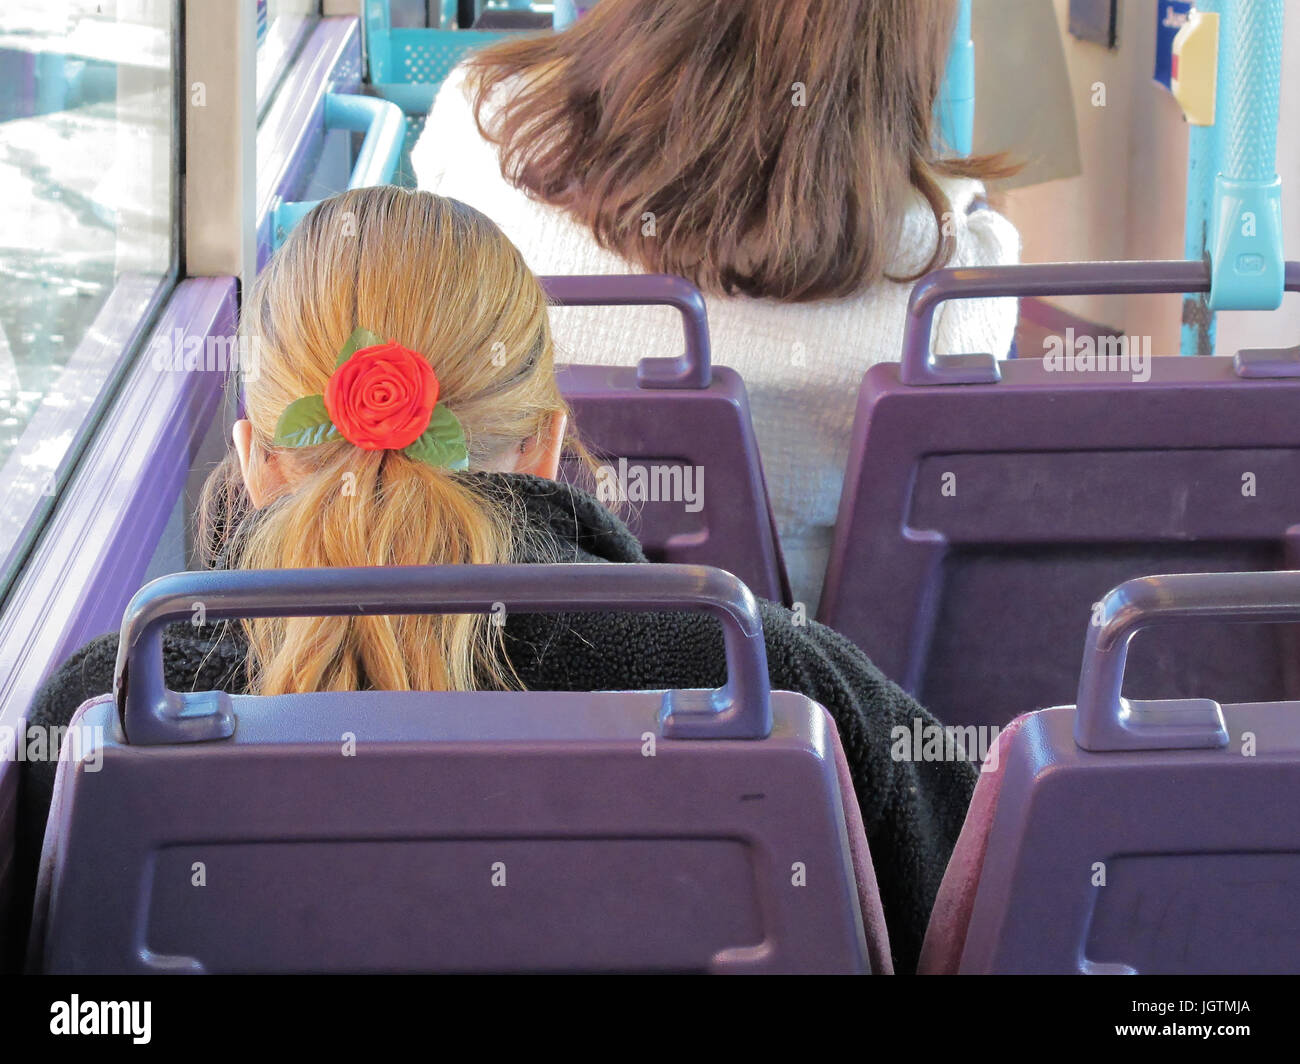 the back of the head with a rose hairband blonde hair girl woman empty bus public transport seats Stock Photo